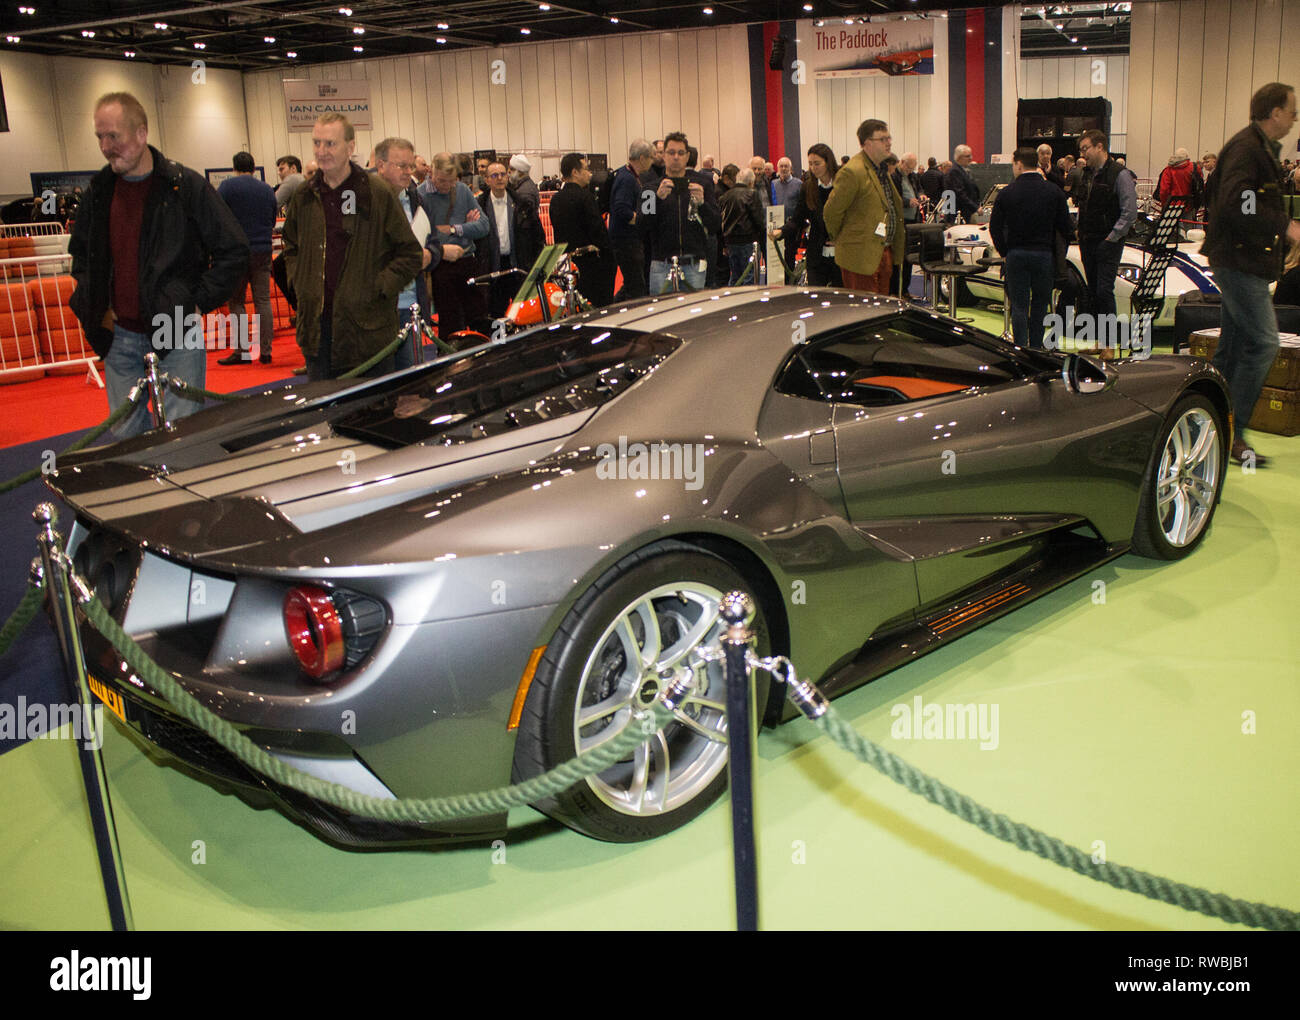 A Ford GT 2018 at the London Classic Car Show 2019 Stock Photo